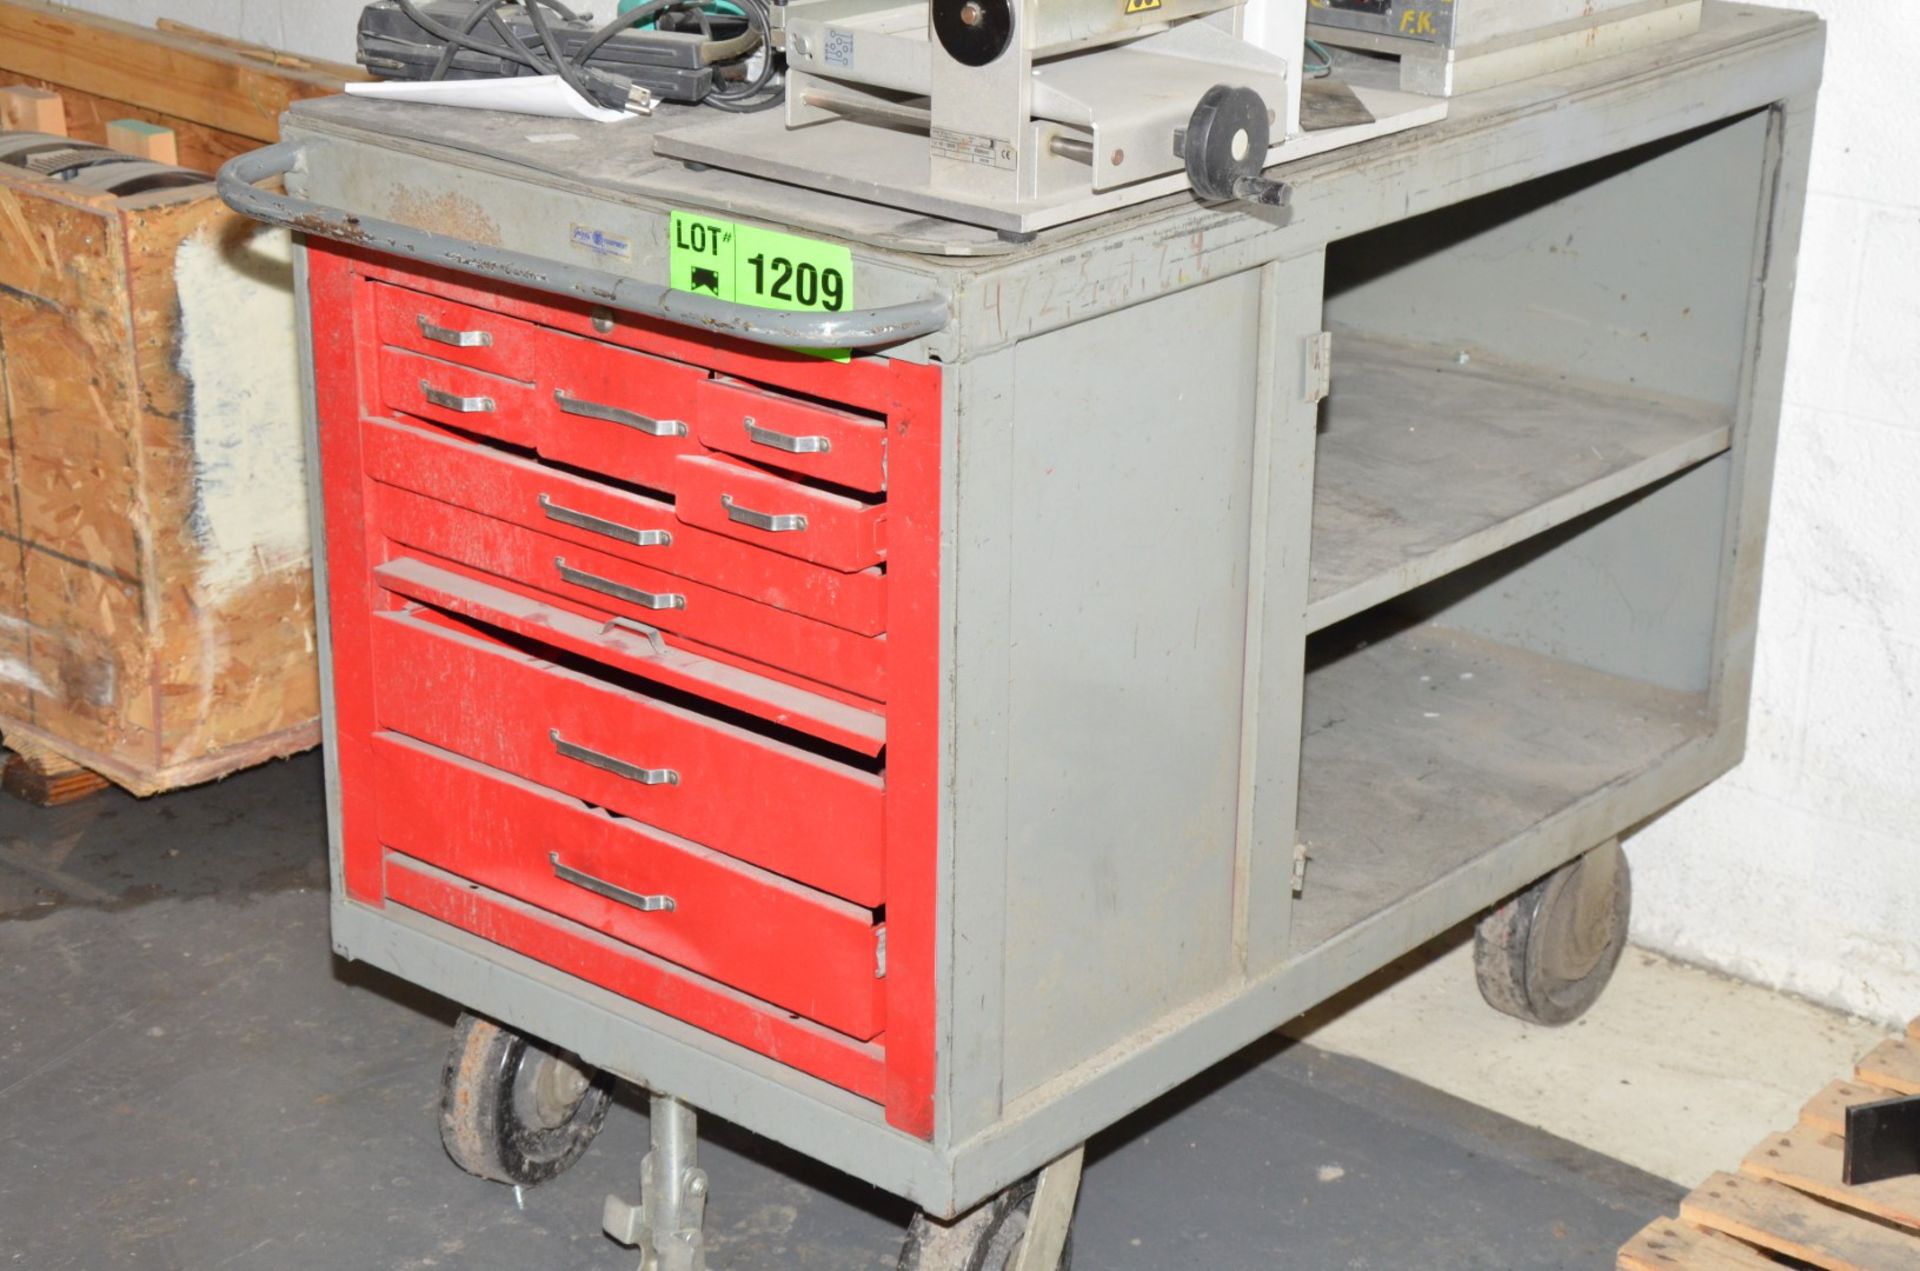 ROLLING TOOLBOX [RIGGING FEE FOR LOT #1209 - $25 USD PLUS APPLICABLE TAXES] - Image 2 of 3